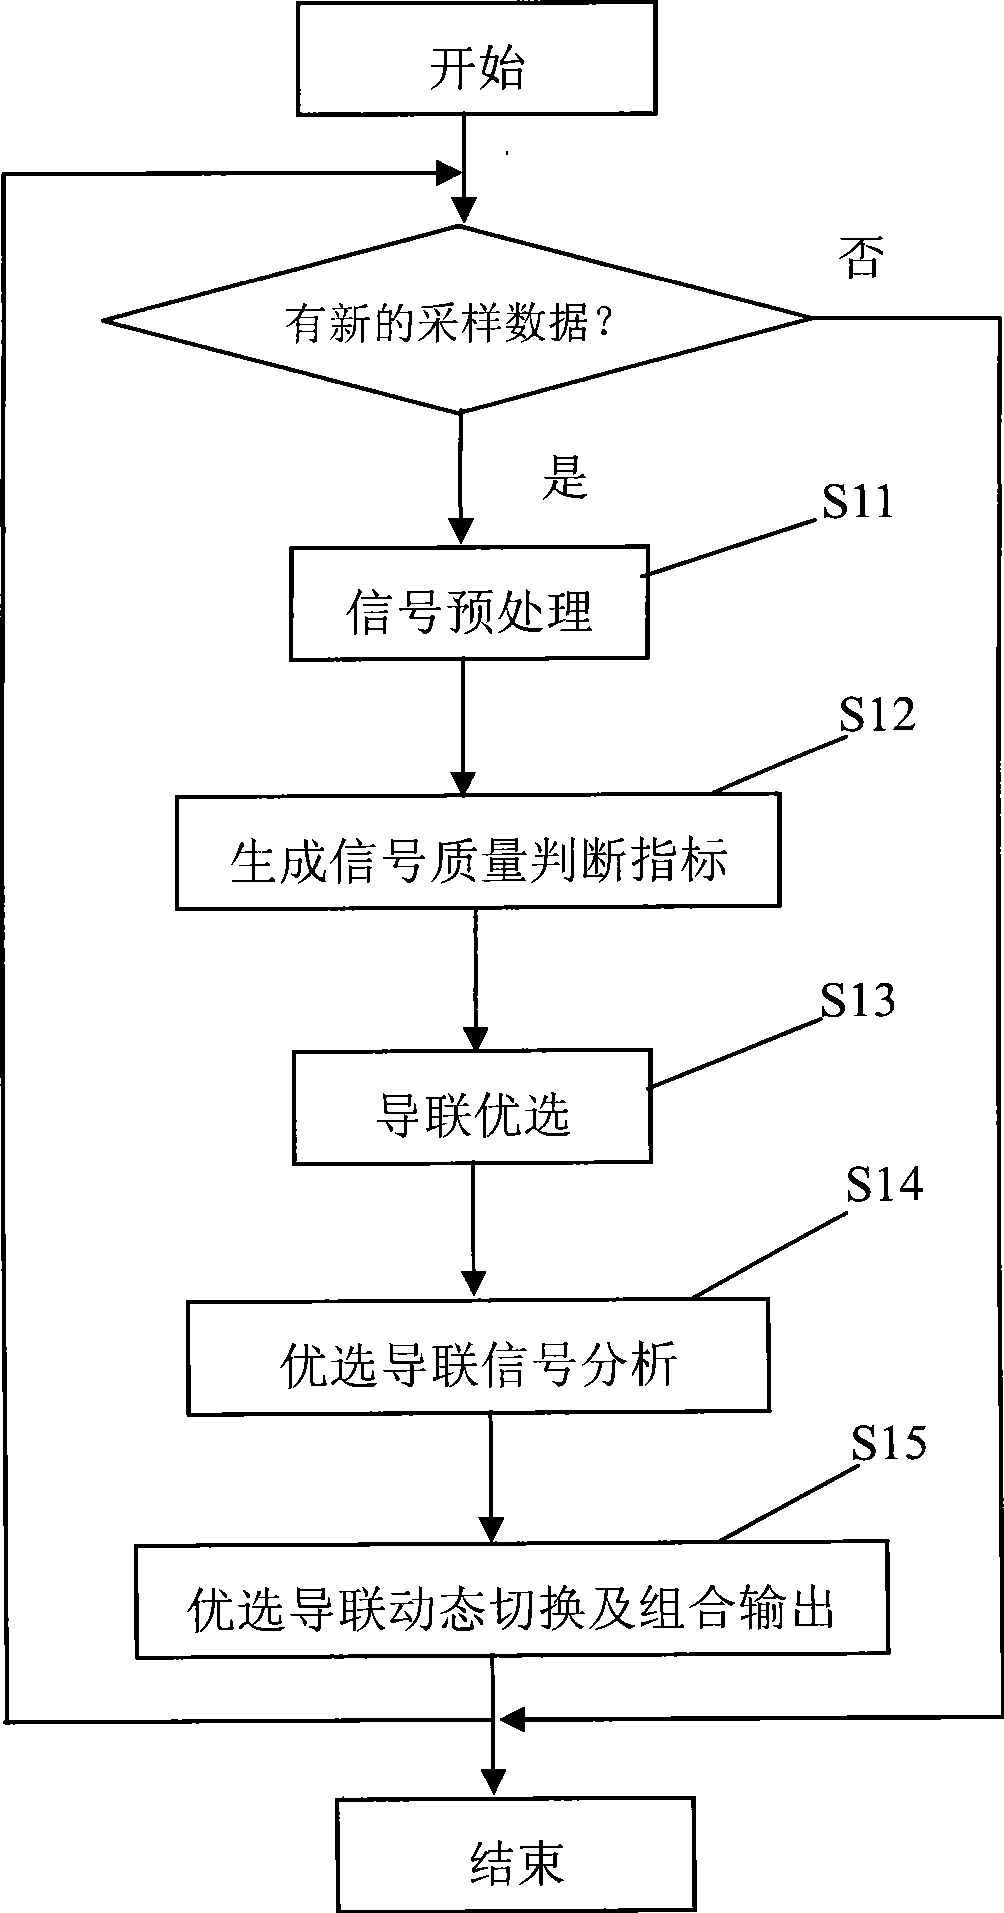 Method and device for processing multi-lead synchronized electrocardiosignal